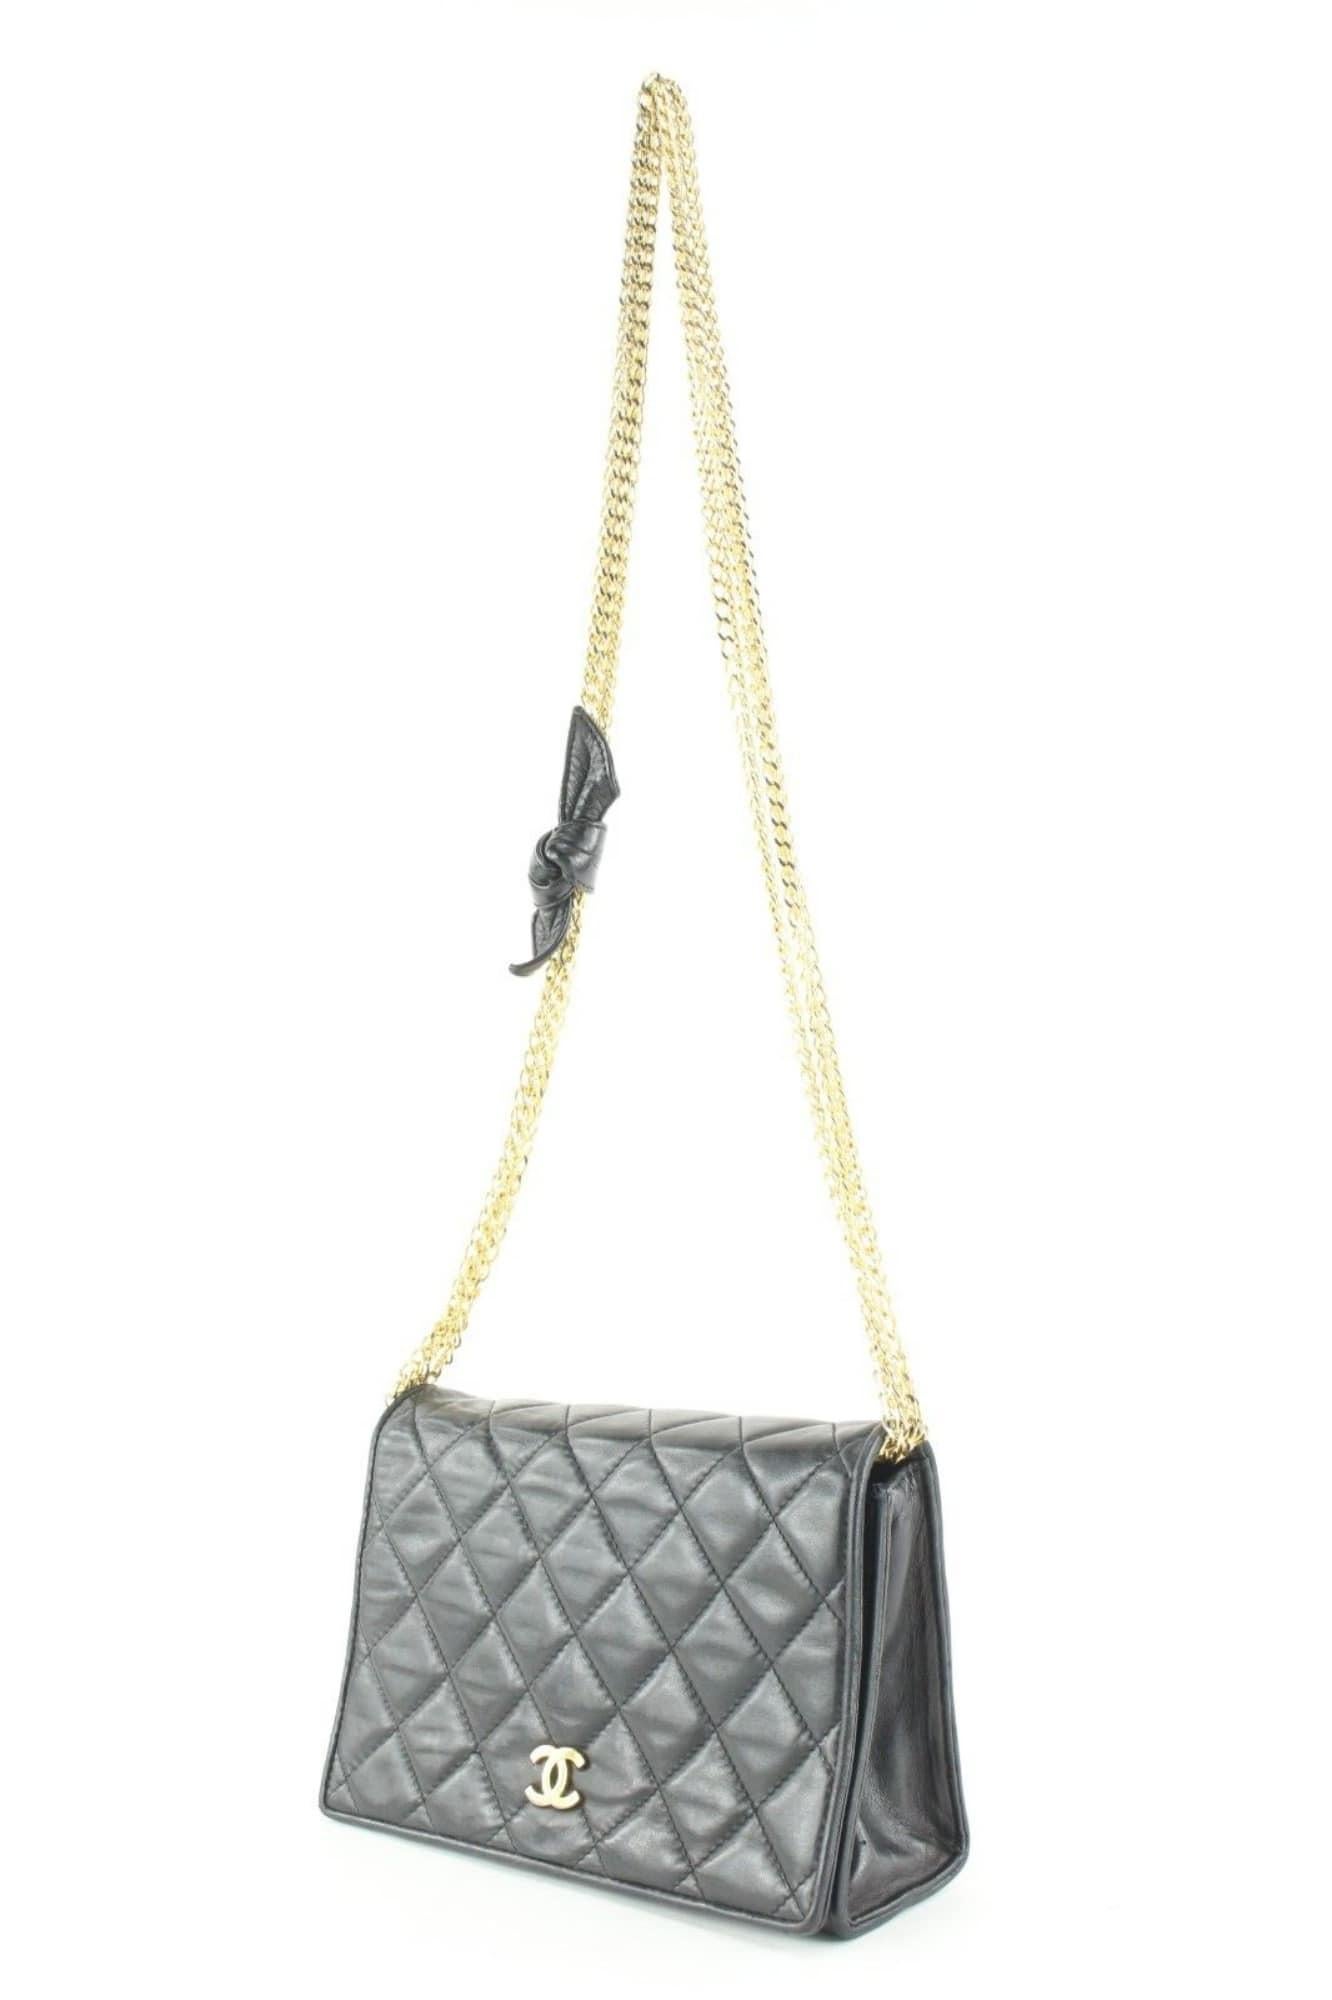 Chanel Black Quilted Lambskin Multi Chain GHW 3CK419C
Date Code/Serial Number: 0427985

Made In: Italy

Measurements: Length:  7.75